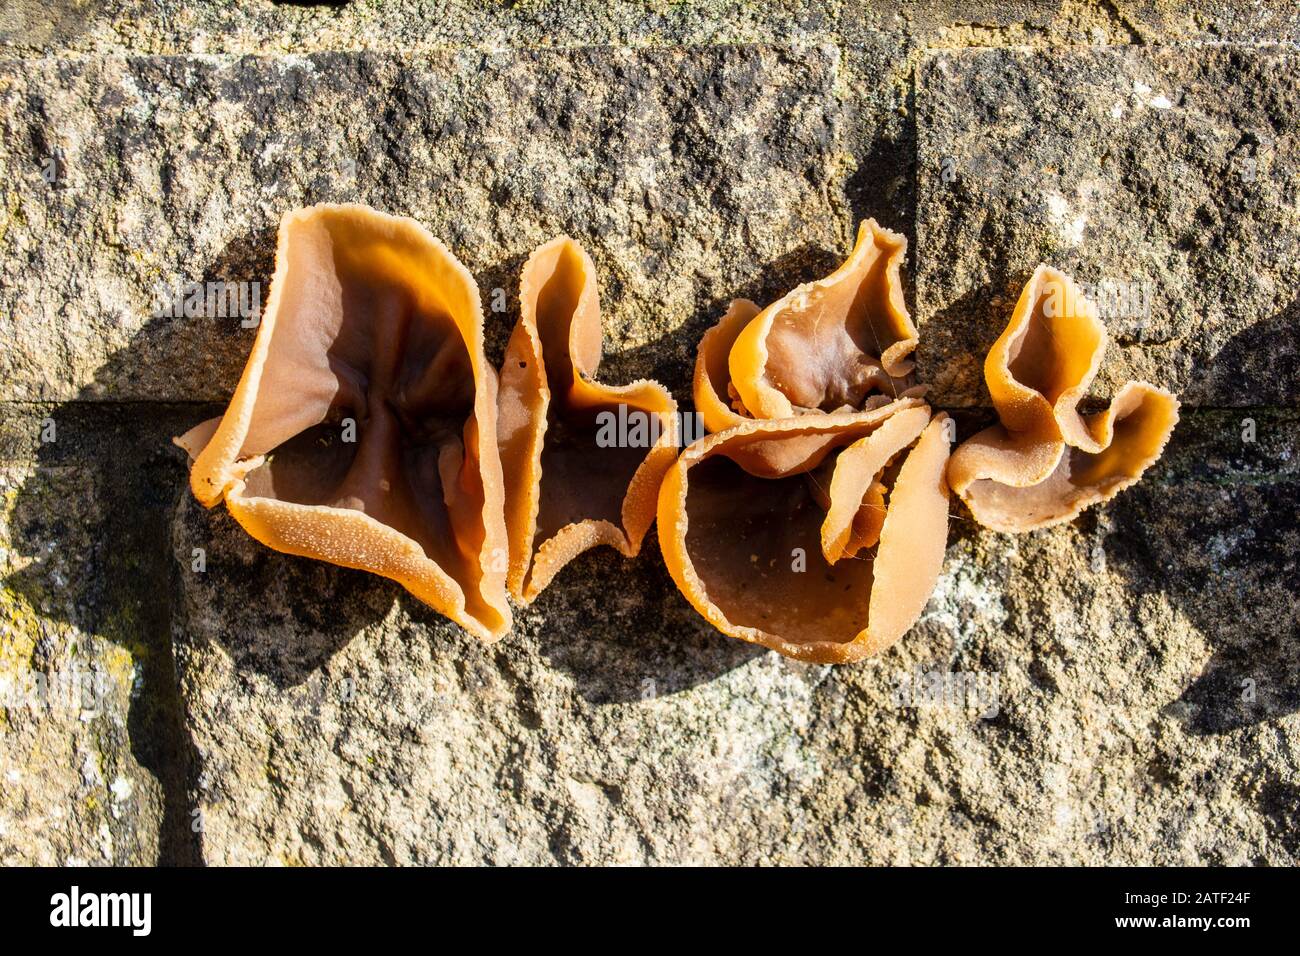 Close view of a cluster of Peziza similar to  jelly ear fungi Auricularia auricula-judae growing from a wall Stock Photo